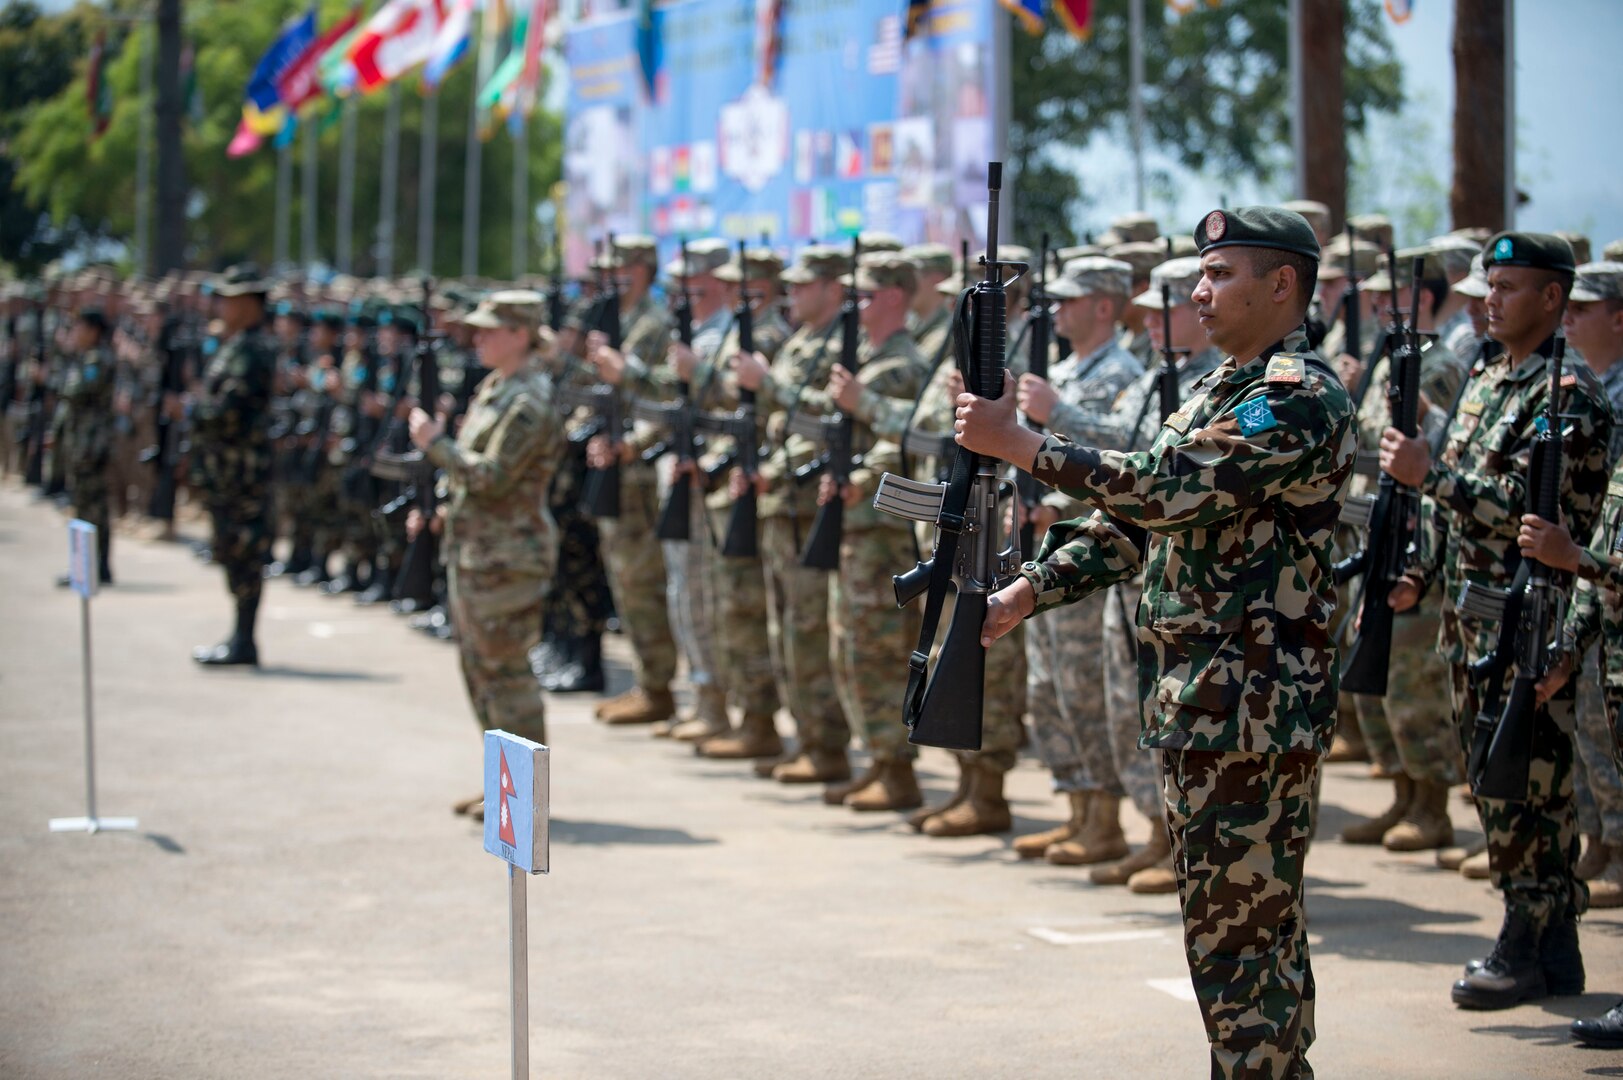 Multiple partner nations present arms in formation during the opening ceremony of exercise Shanti Prayas III in Nepal.  Shanti Prayas III is a multinational United Nations peacekeeping exercise designed to provide pre-deployment training to U.N. partner countries in preparation for real-world peacekeeping operations. (U.S. Navy Photo by Petty Officer 2nd Class Taylor Mohr)